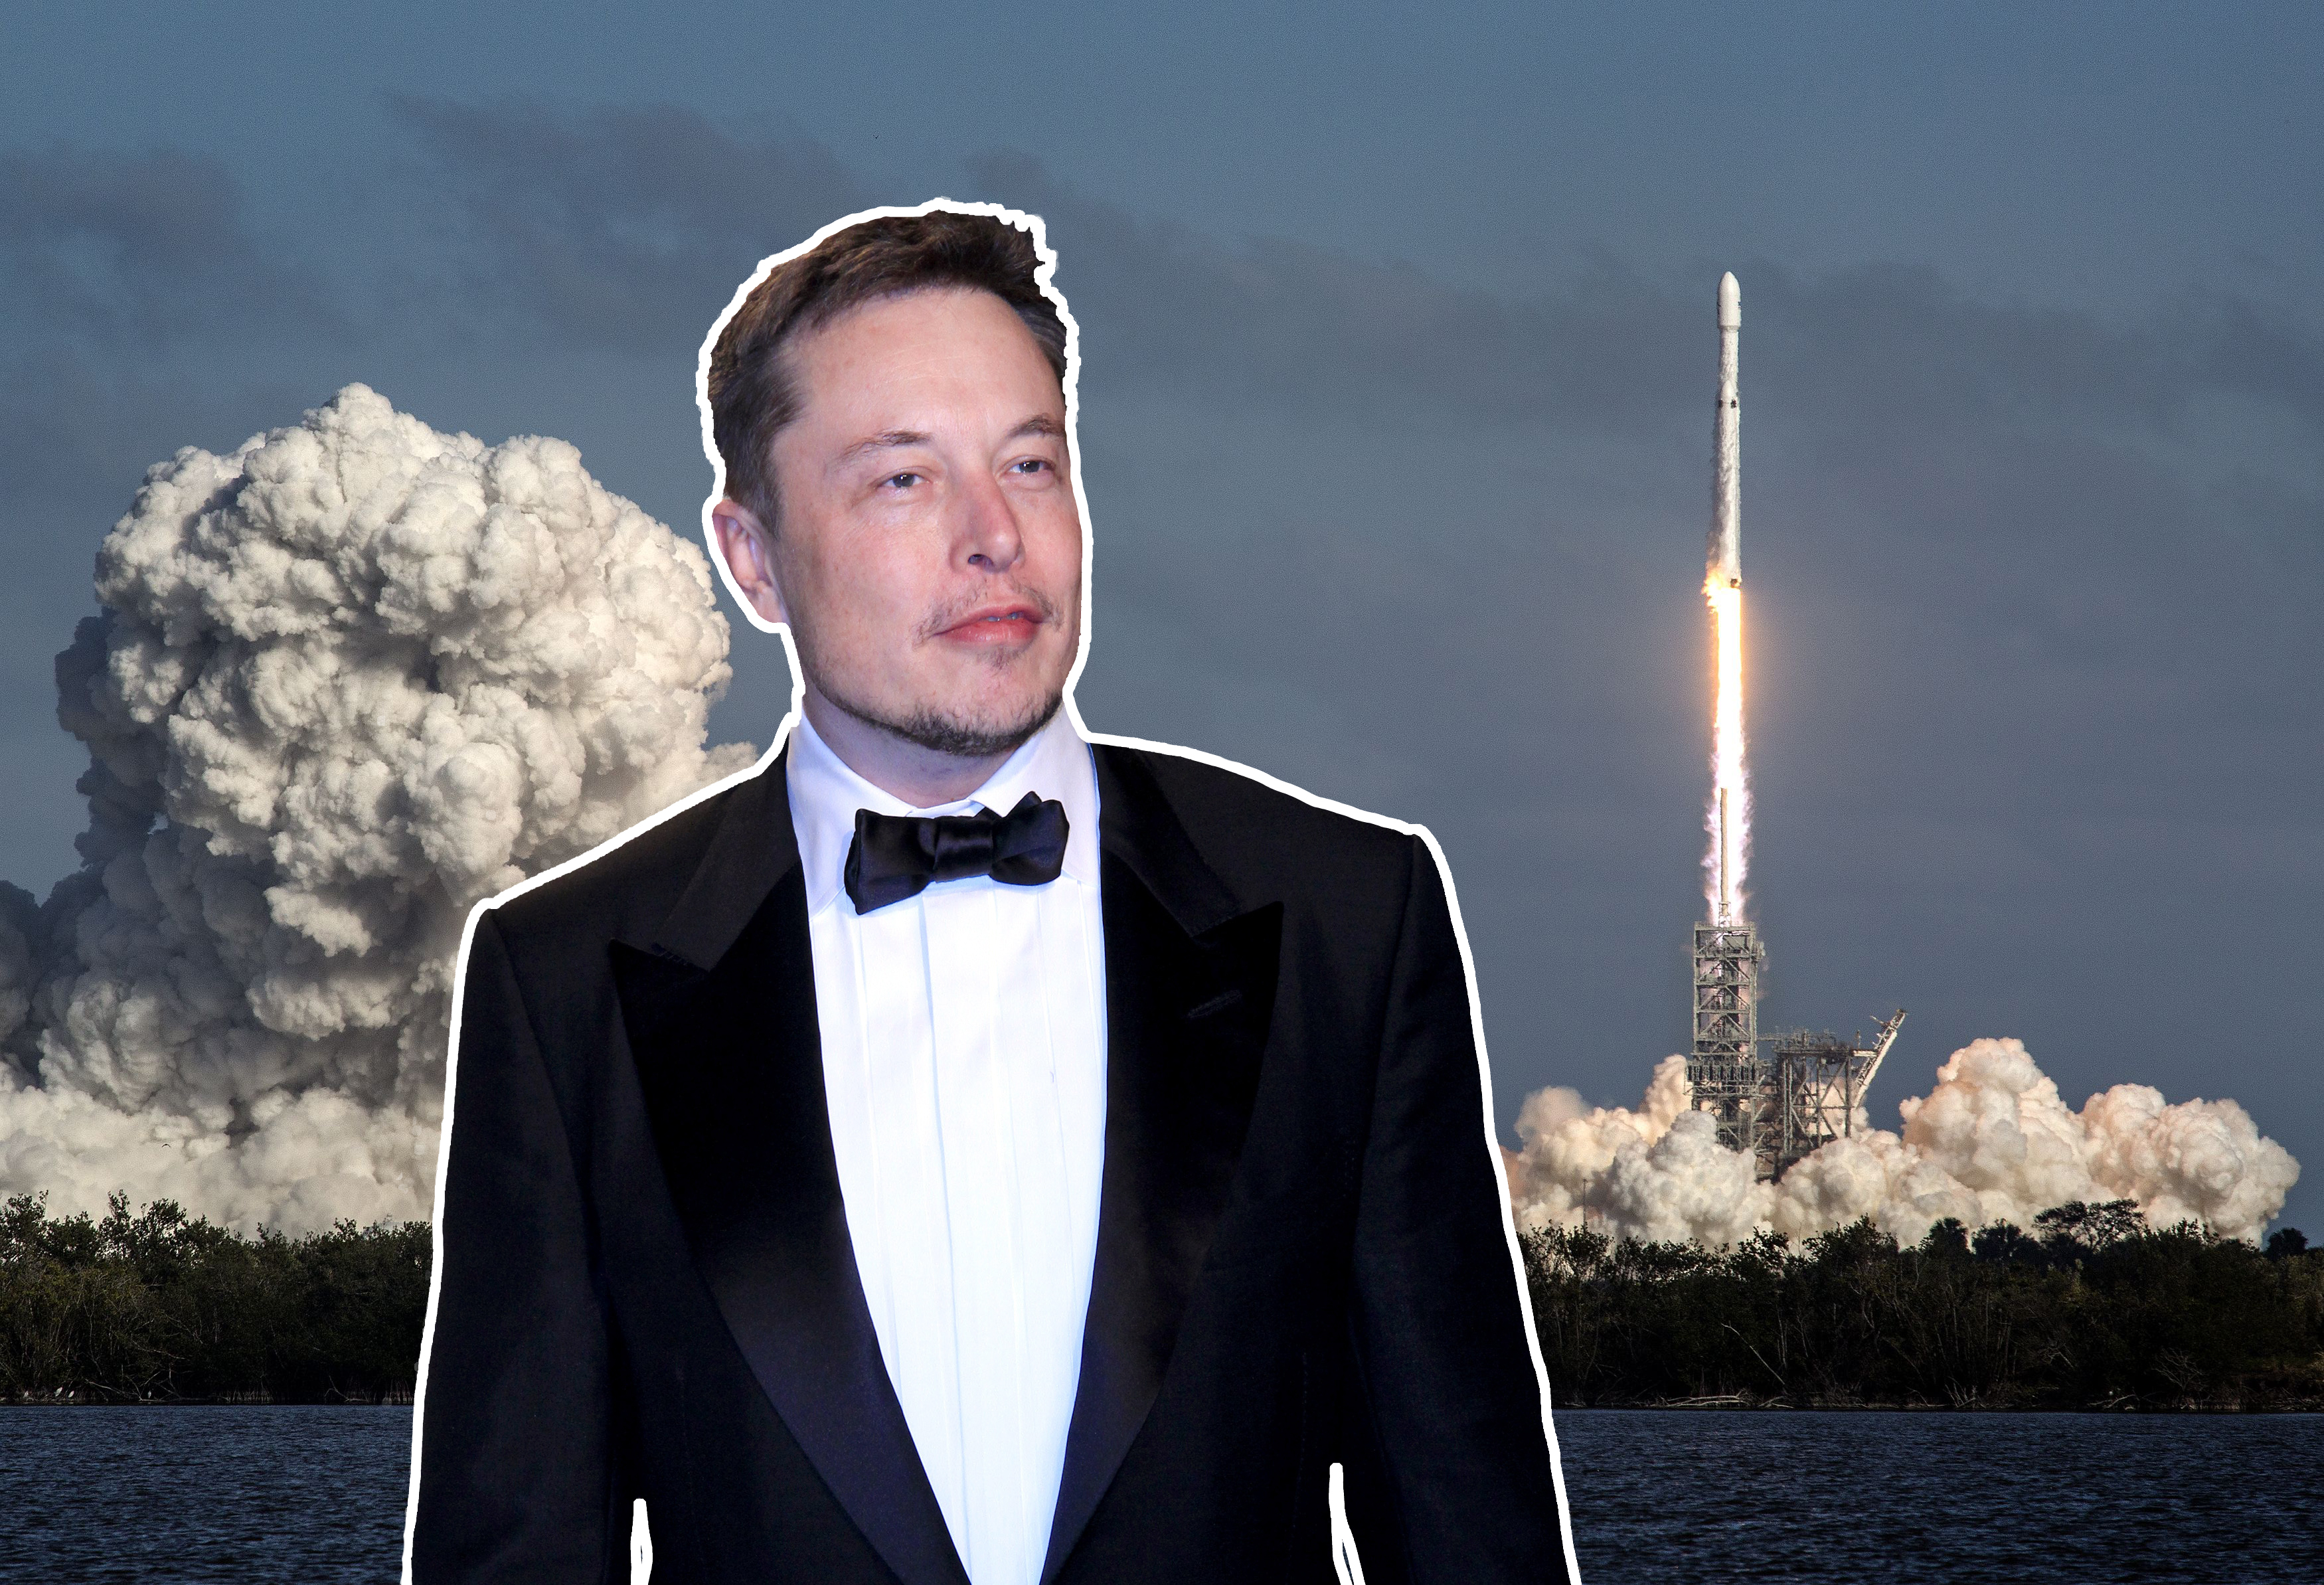 Elon Musk’s Net Worth Has Almost Doubled in One Year